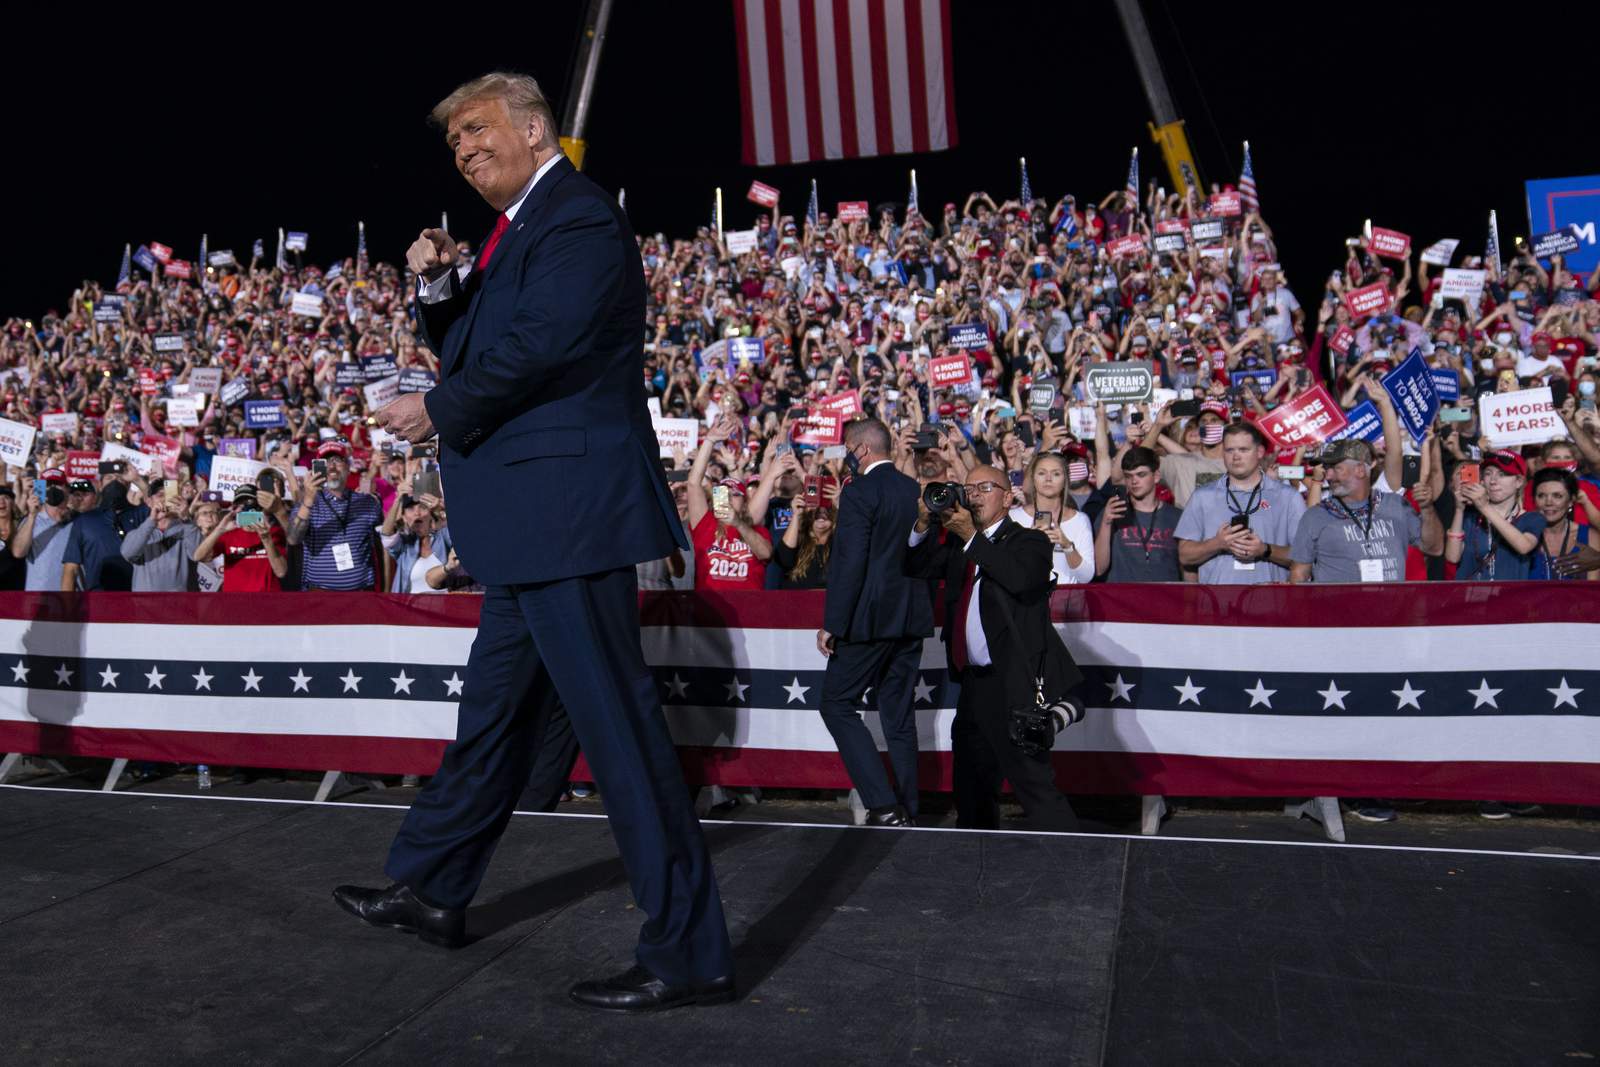 The Latest: Trump tells rally about '60 Minutes' interview